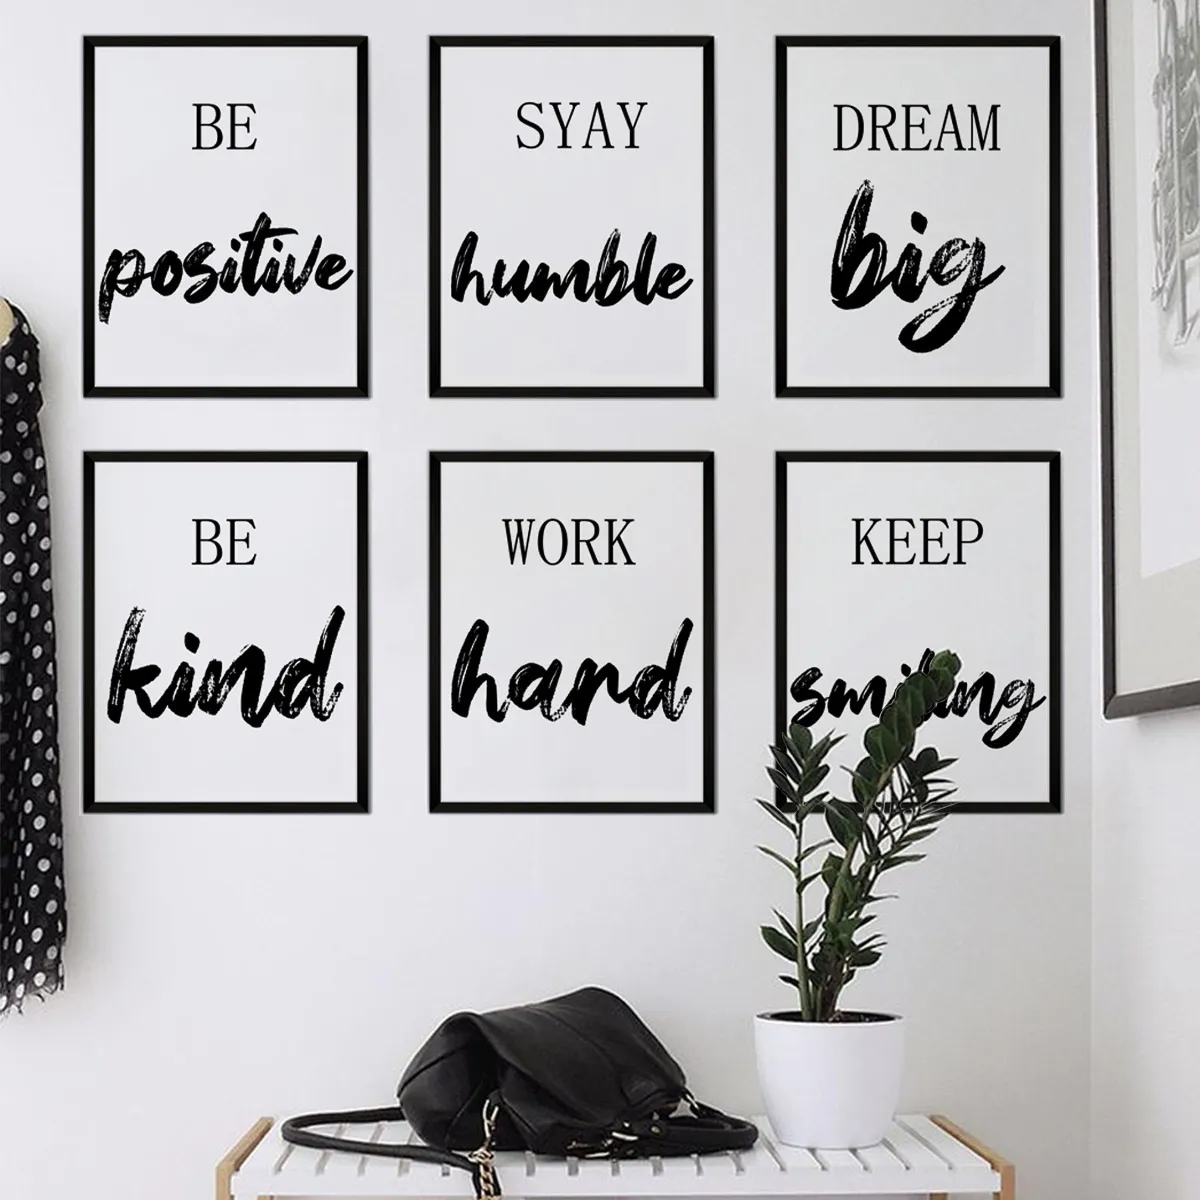 6pcs/Set Inspirational Quotes Frame Wall Stickers Home Office Decor Room Decoration Positive Bedroom Wall Words House Interior